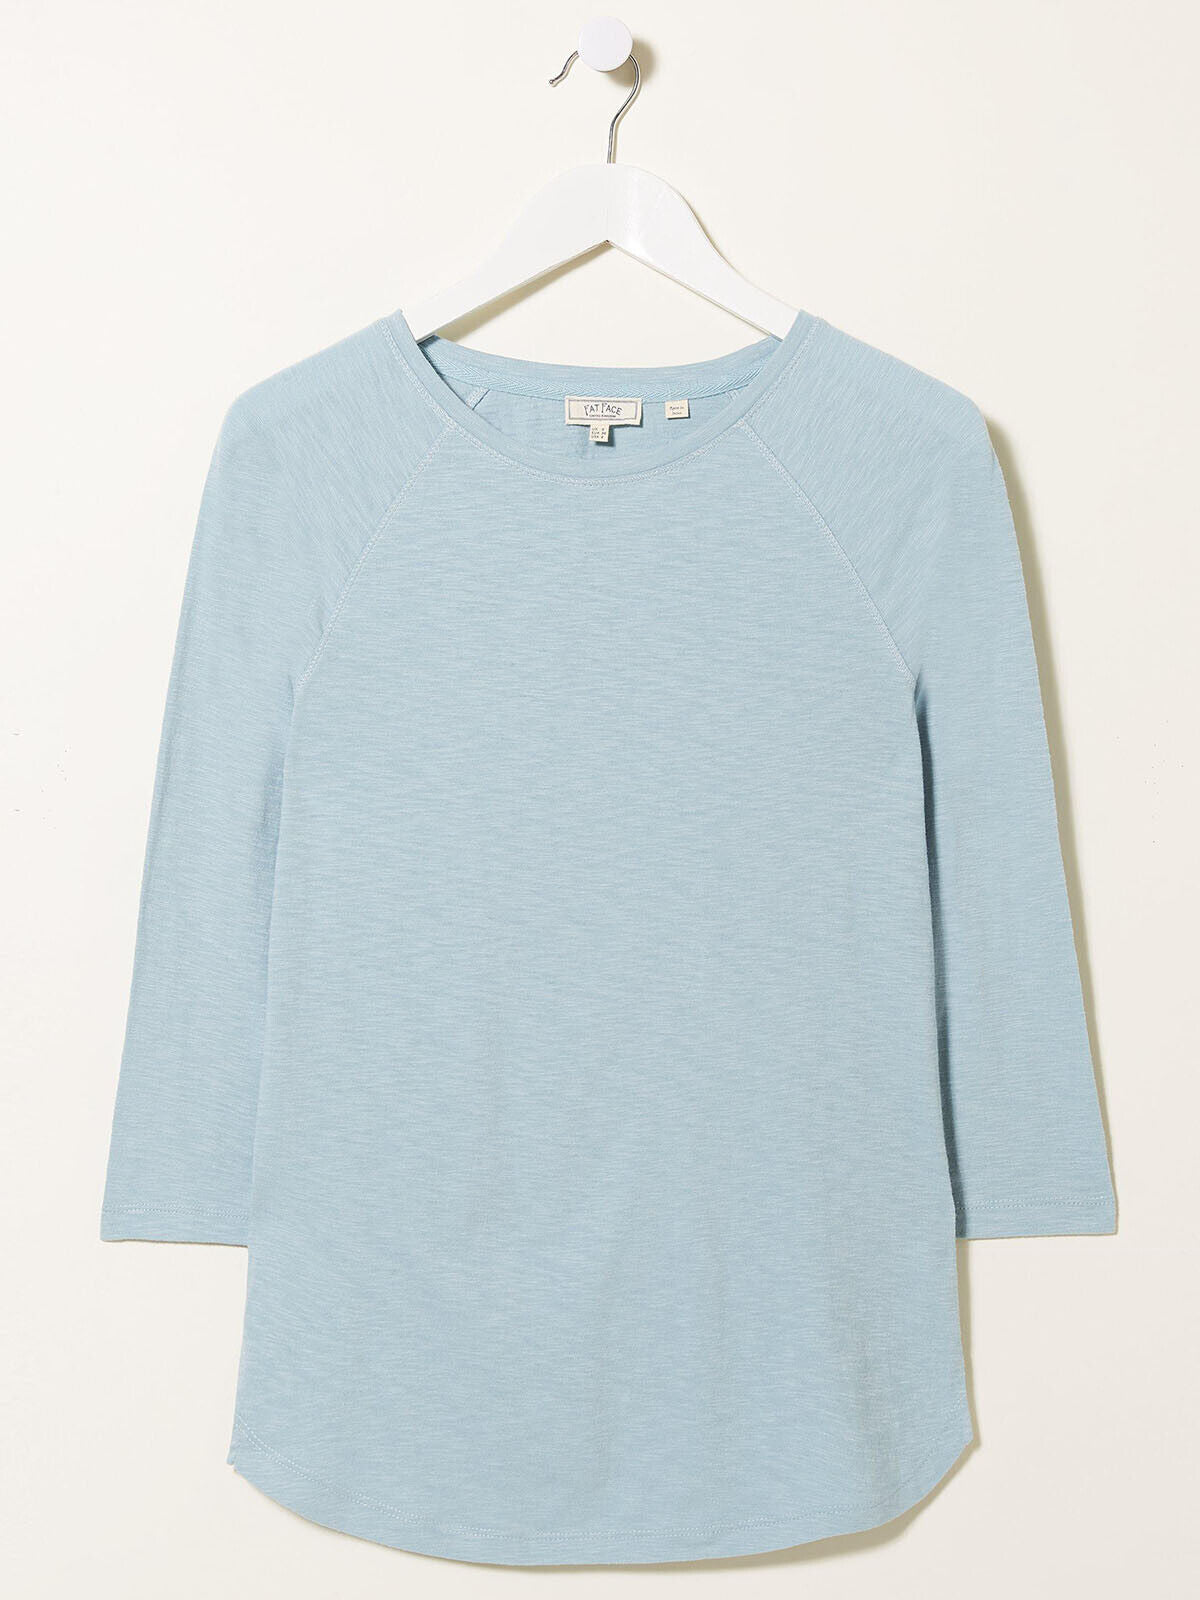 EX Fat Face Duck Egg Eve Raglan Top in Sizes 8, 10, 12, 14, 16 RRP £24